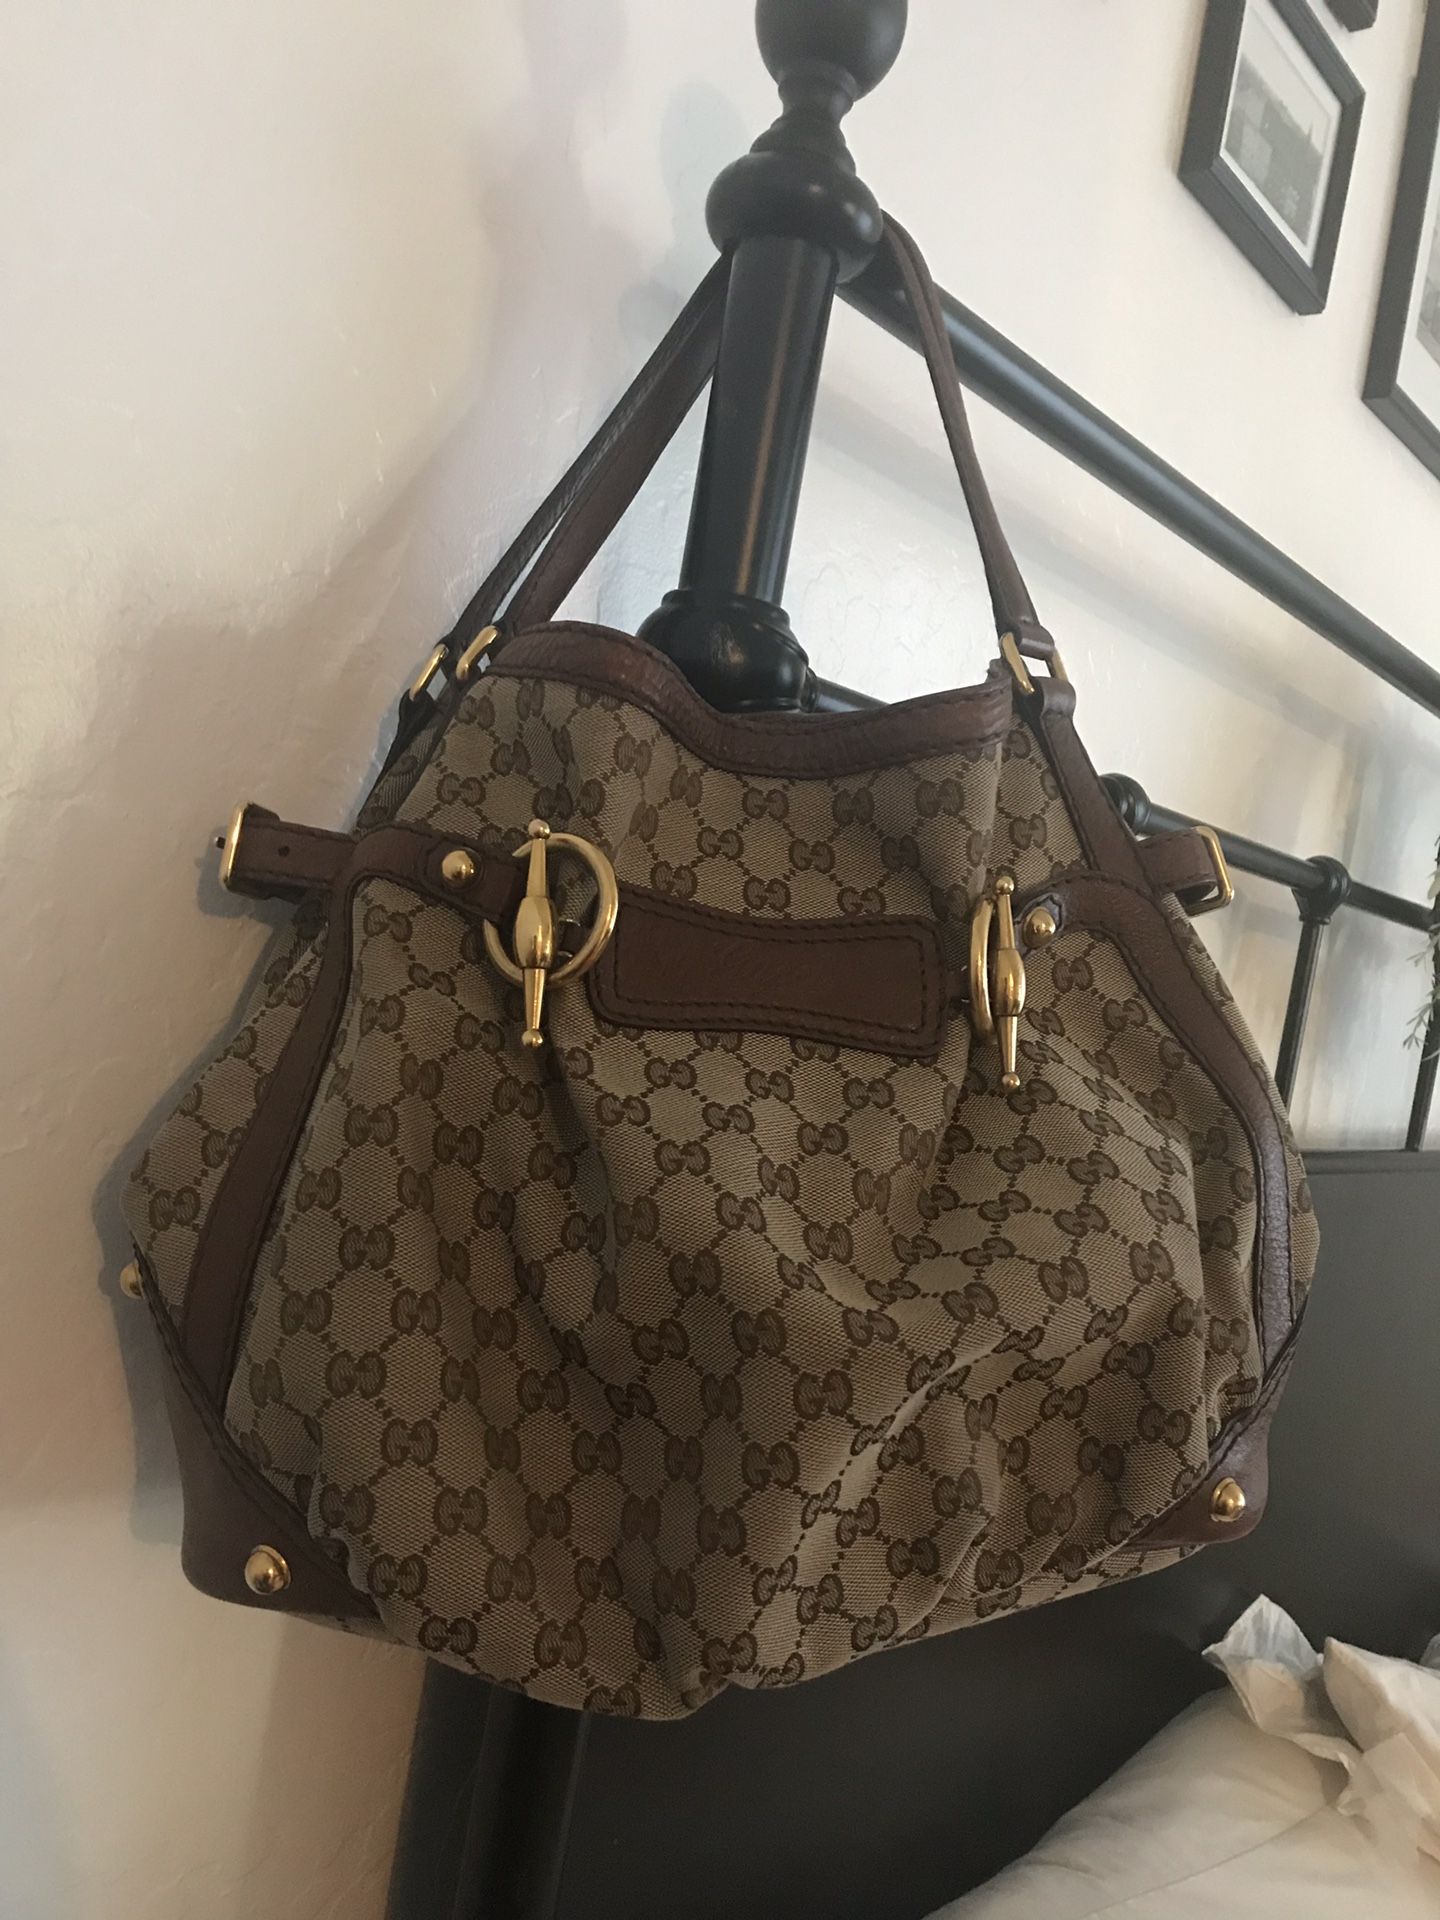 Gucci Hobo bag in great condition